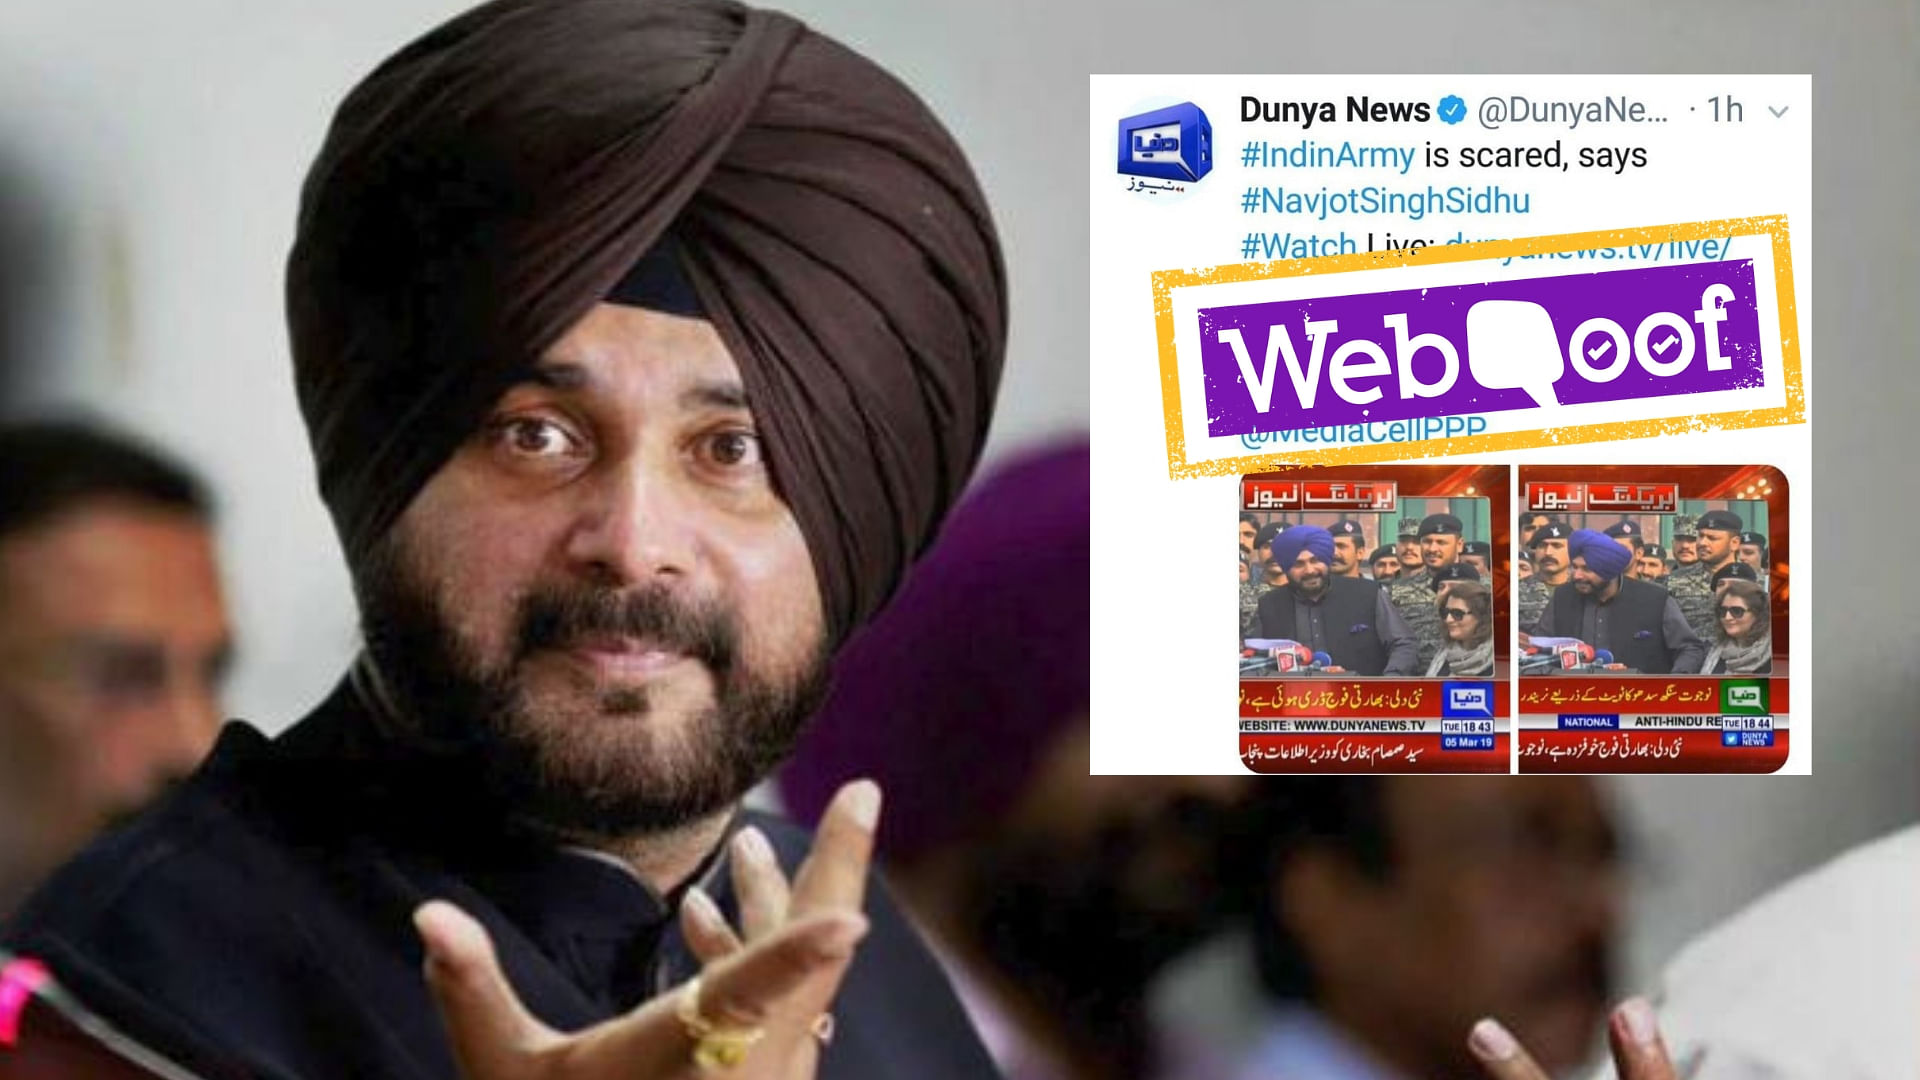 Sidhu’s tweet read “Army is as sacred as the state”, which appears to have been misread by the channel as “scared.”